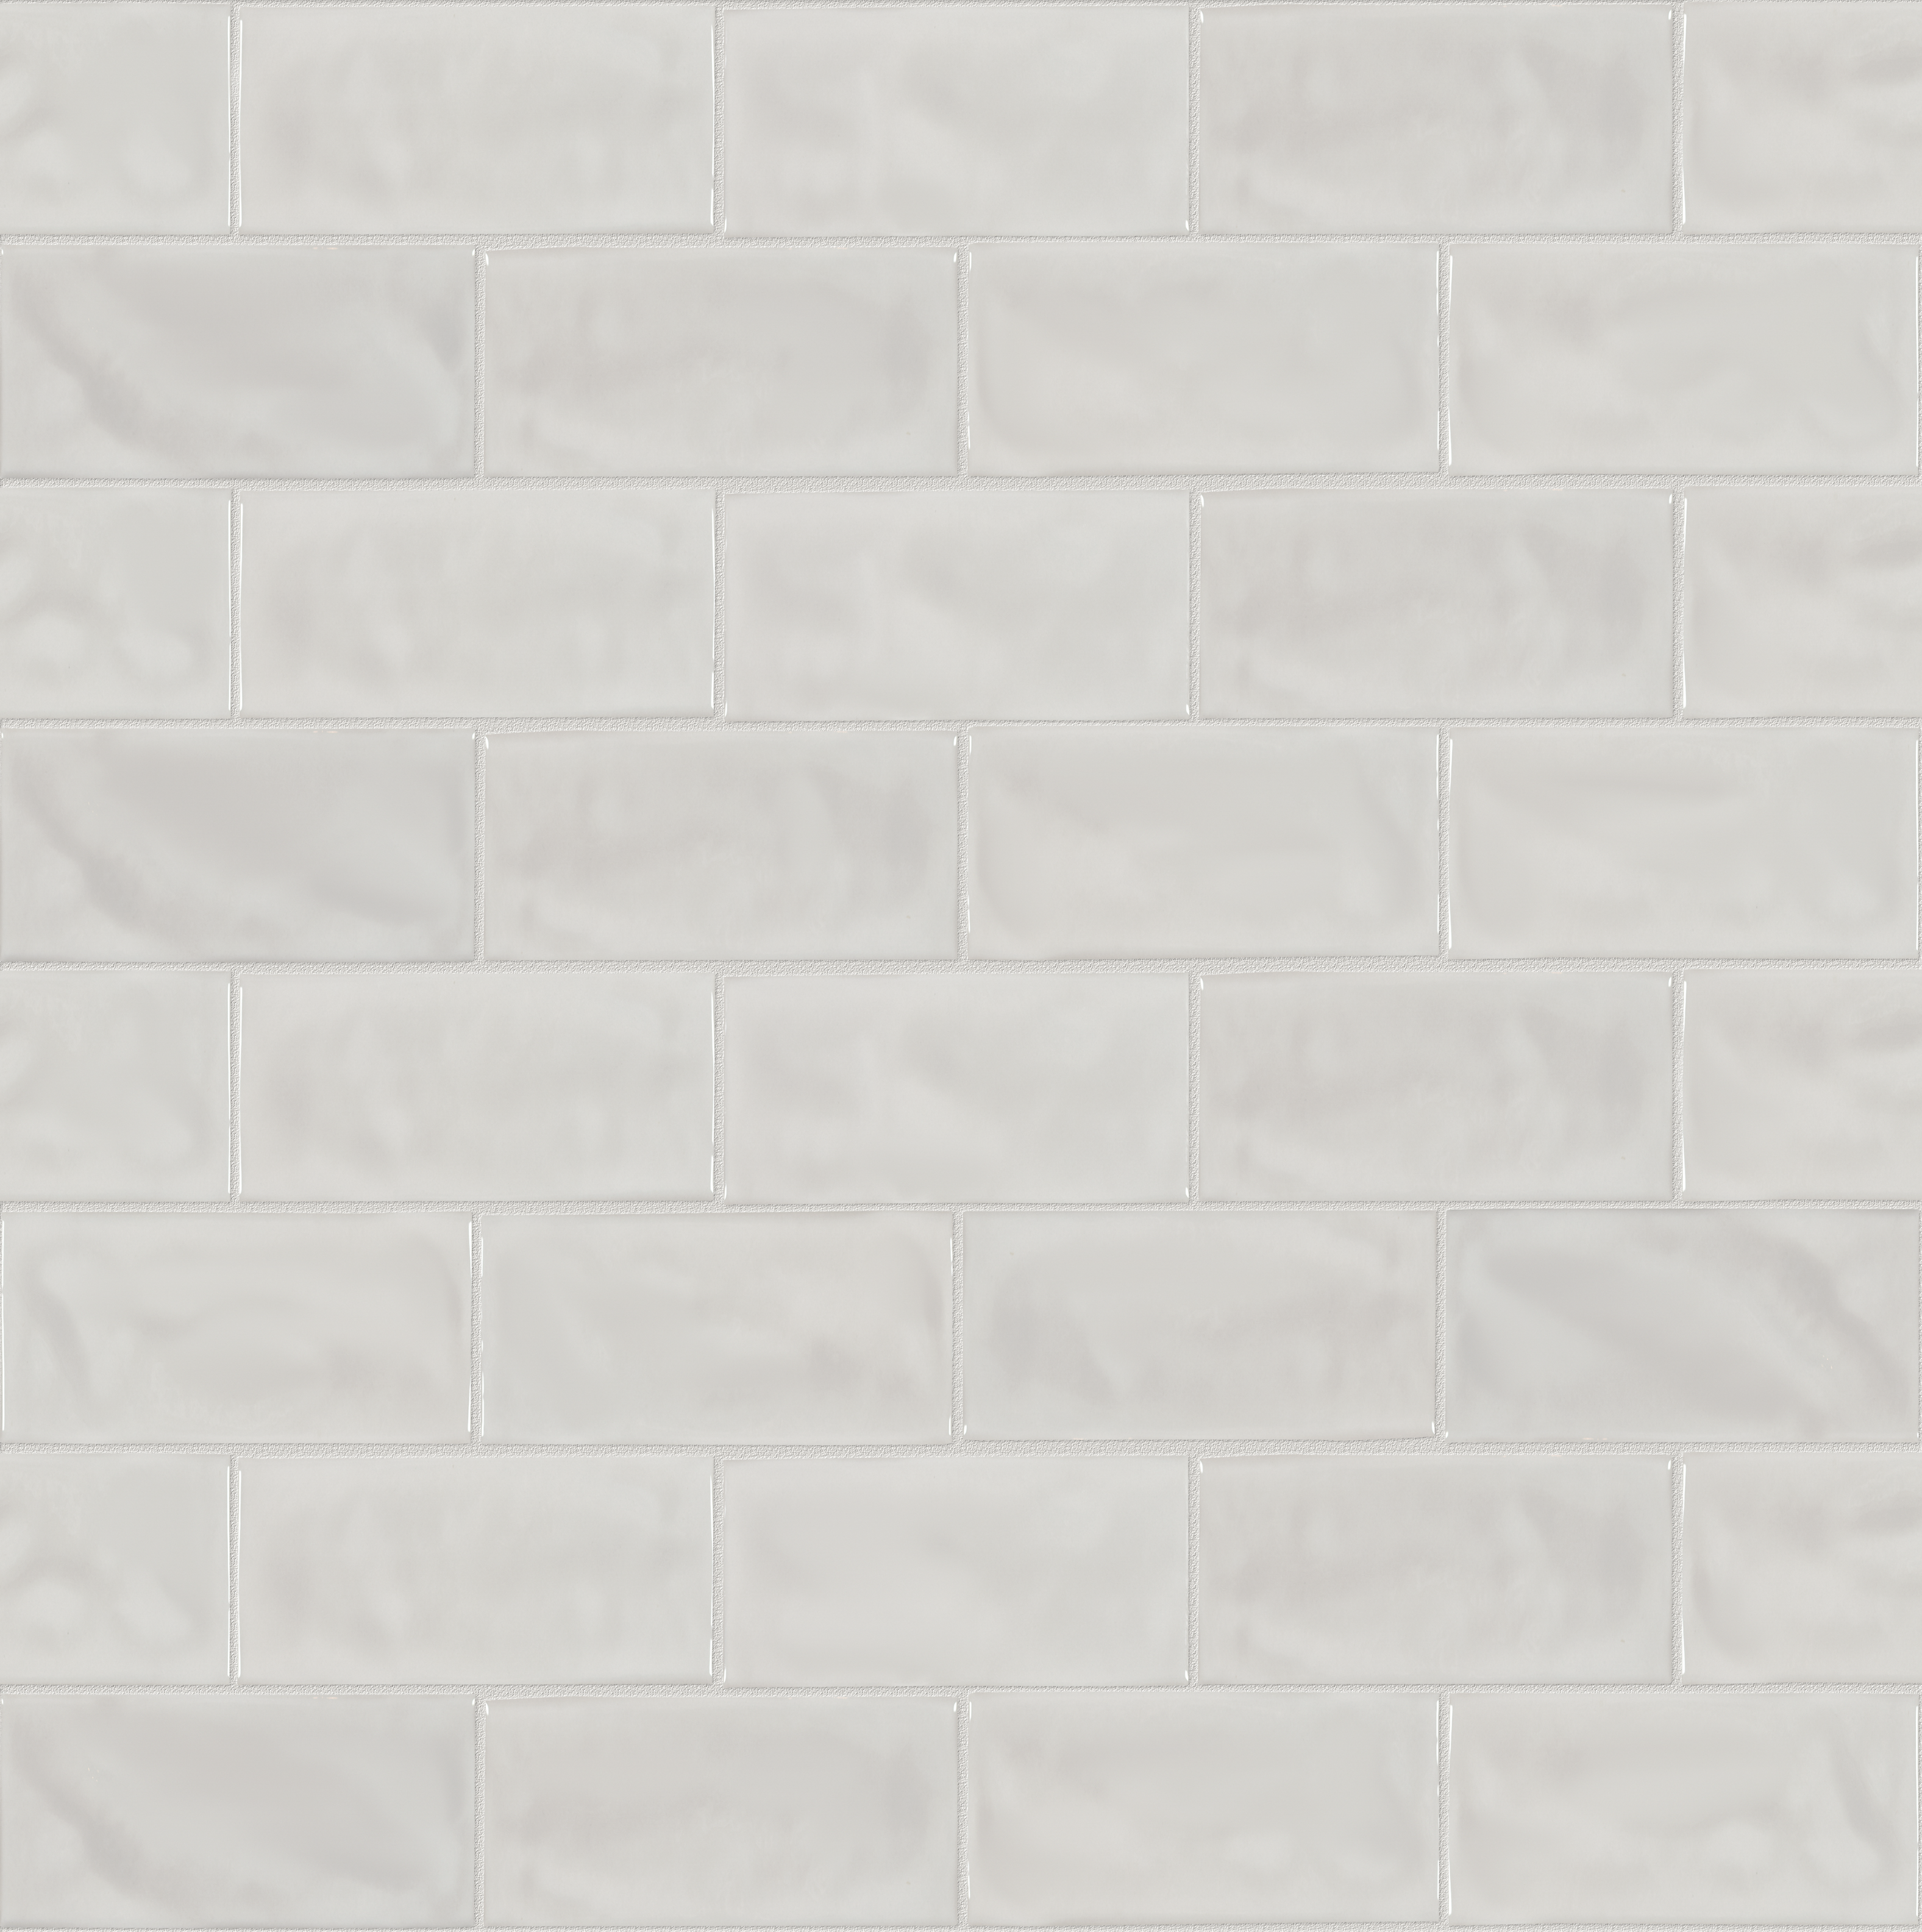 mist pattern glazed ceramic field tile from marlow anatolia collection distributed by surface group international glossy finish pressed edge 3x6 rectangle shape